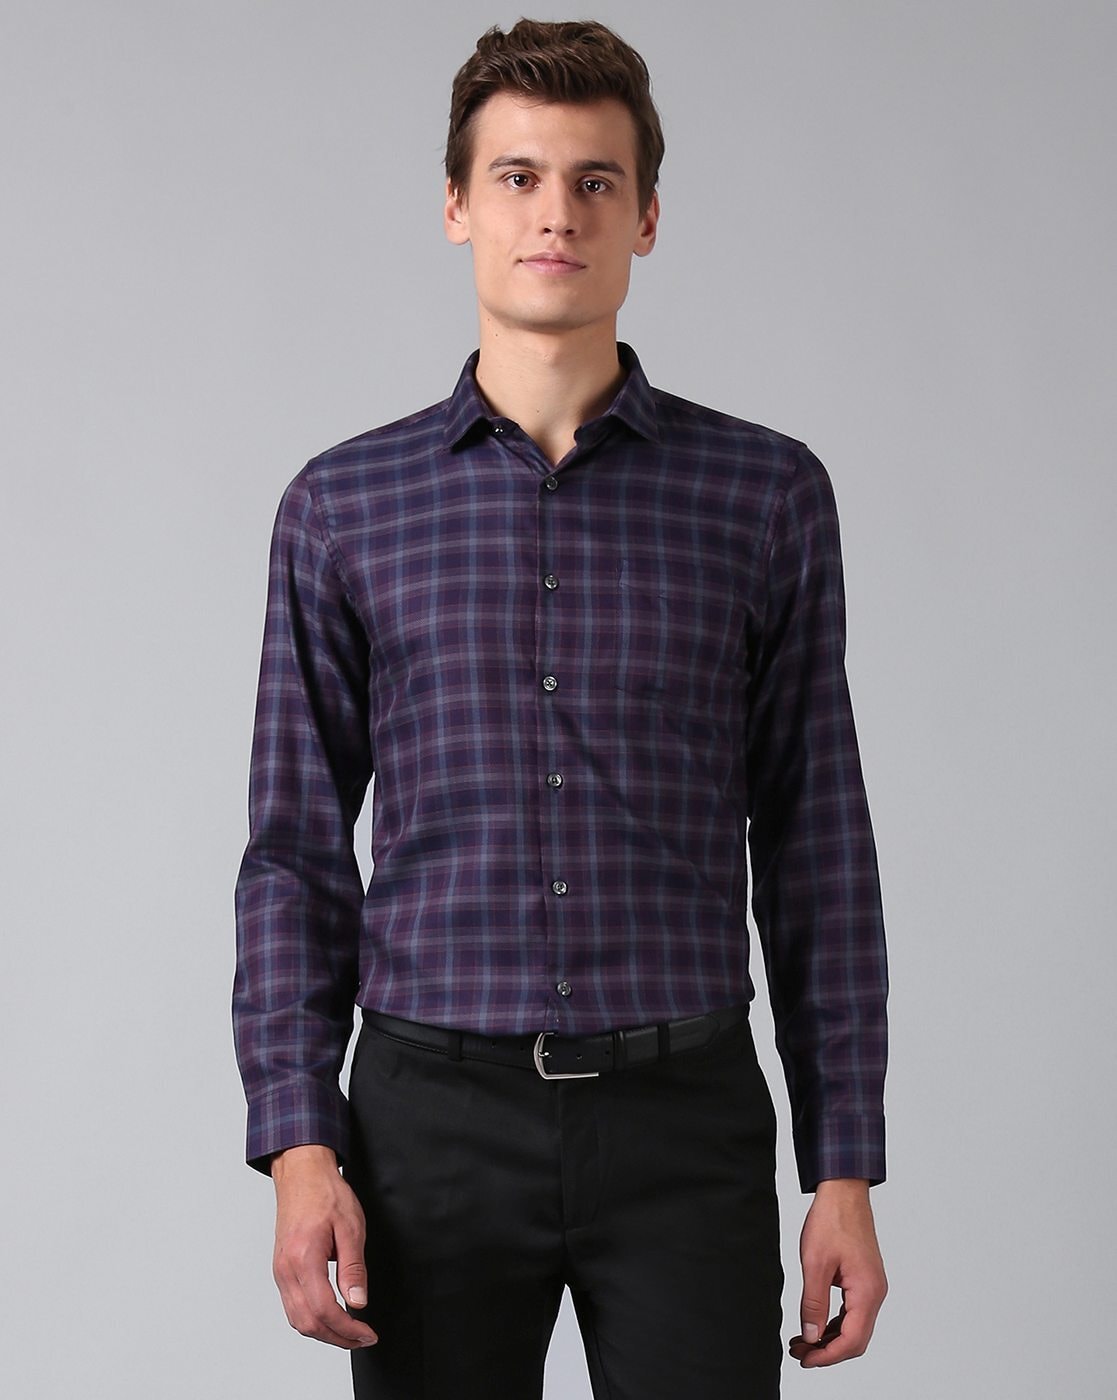 SUBCULTURE SC WOOL CHECK SHIRT PURPLE